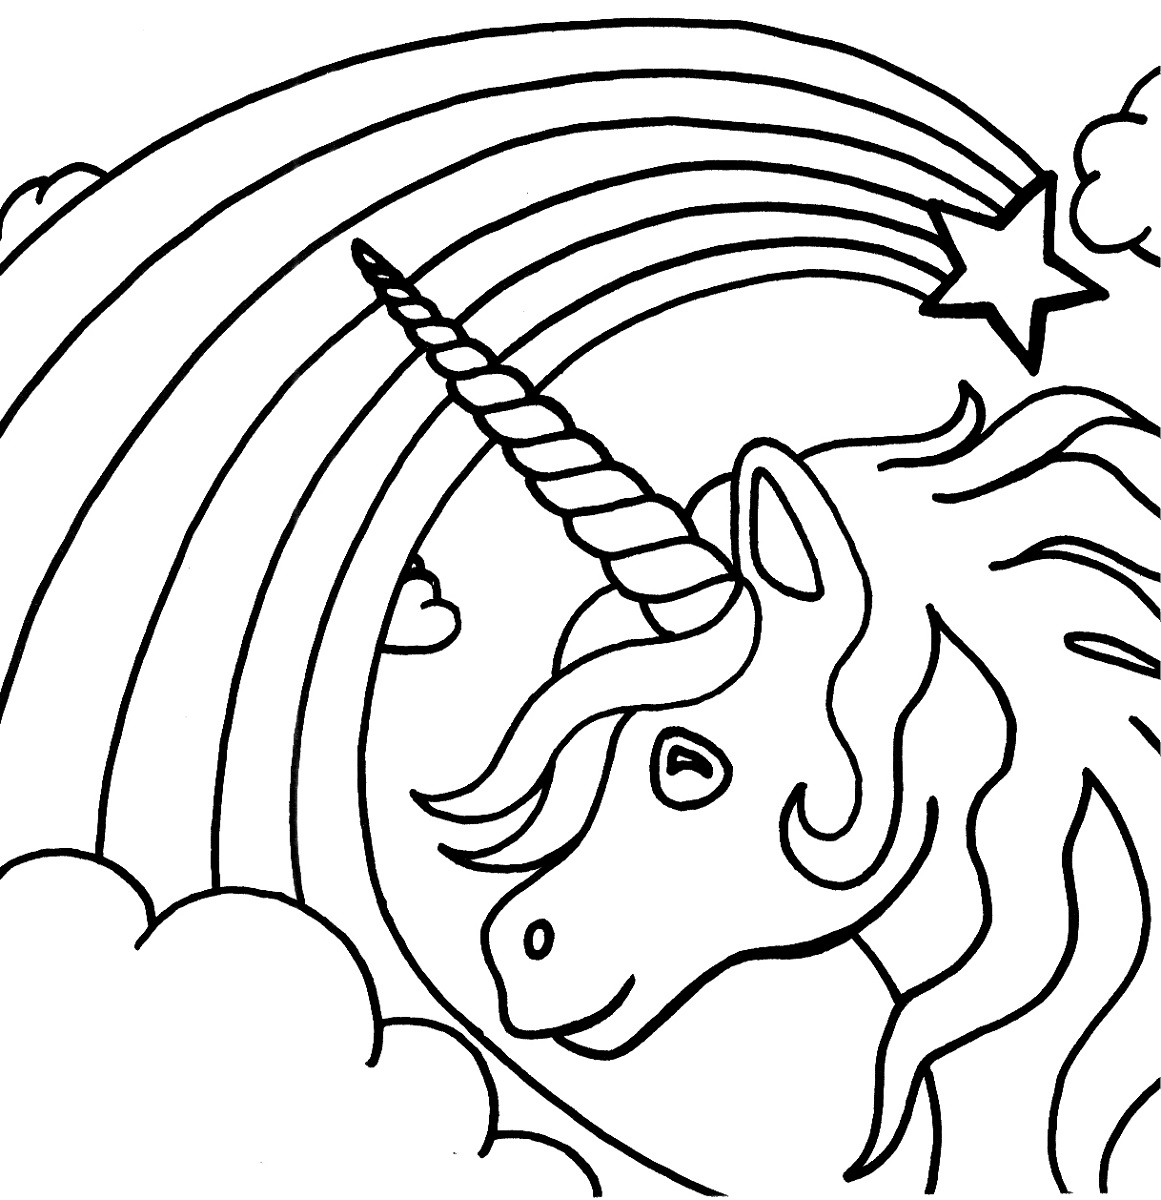 unicorn-coloring-pages-for-kids-at-getcolorings-free-printable-colorings-pages-to-print